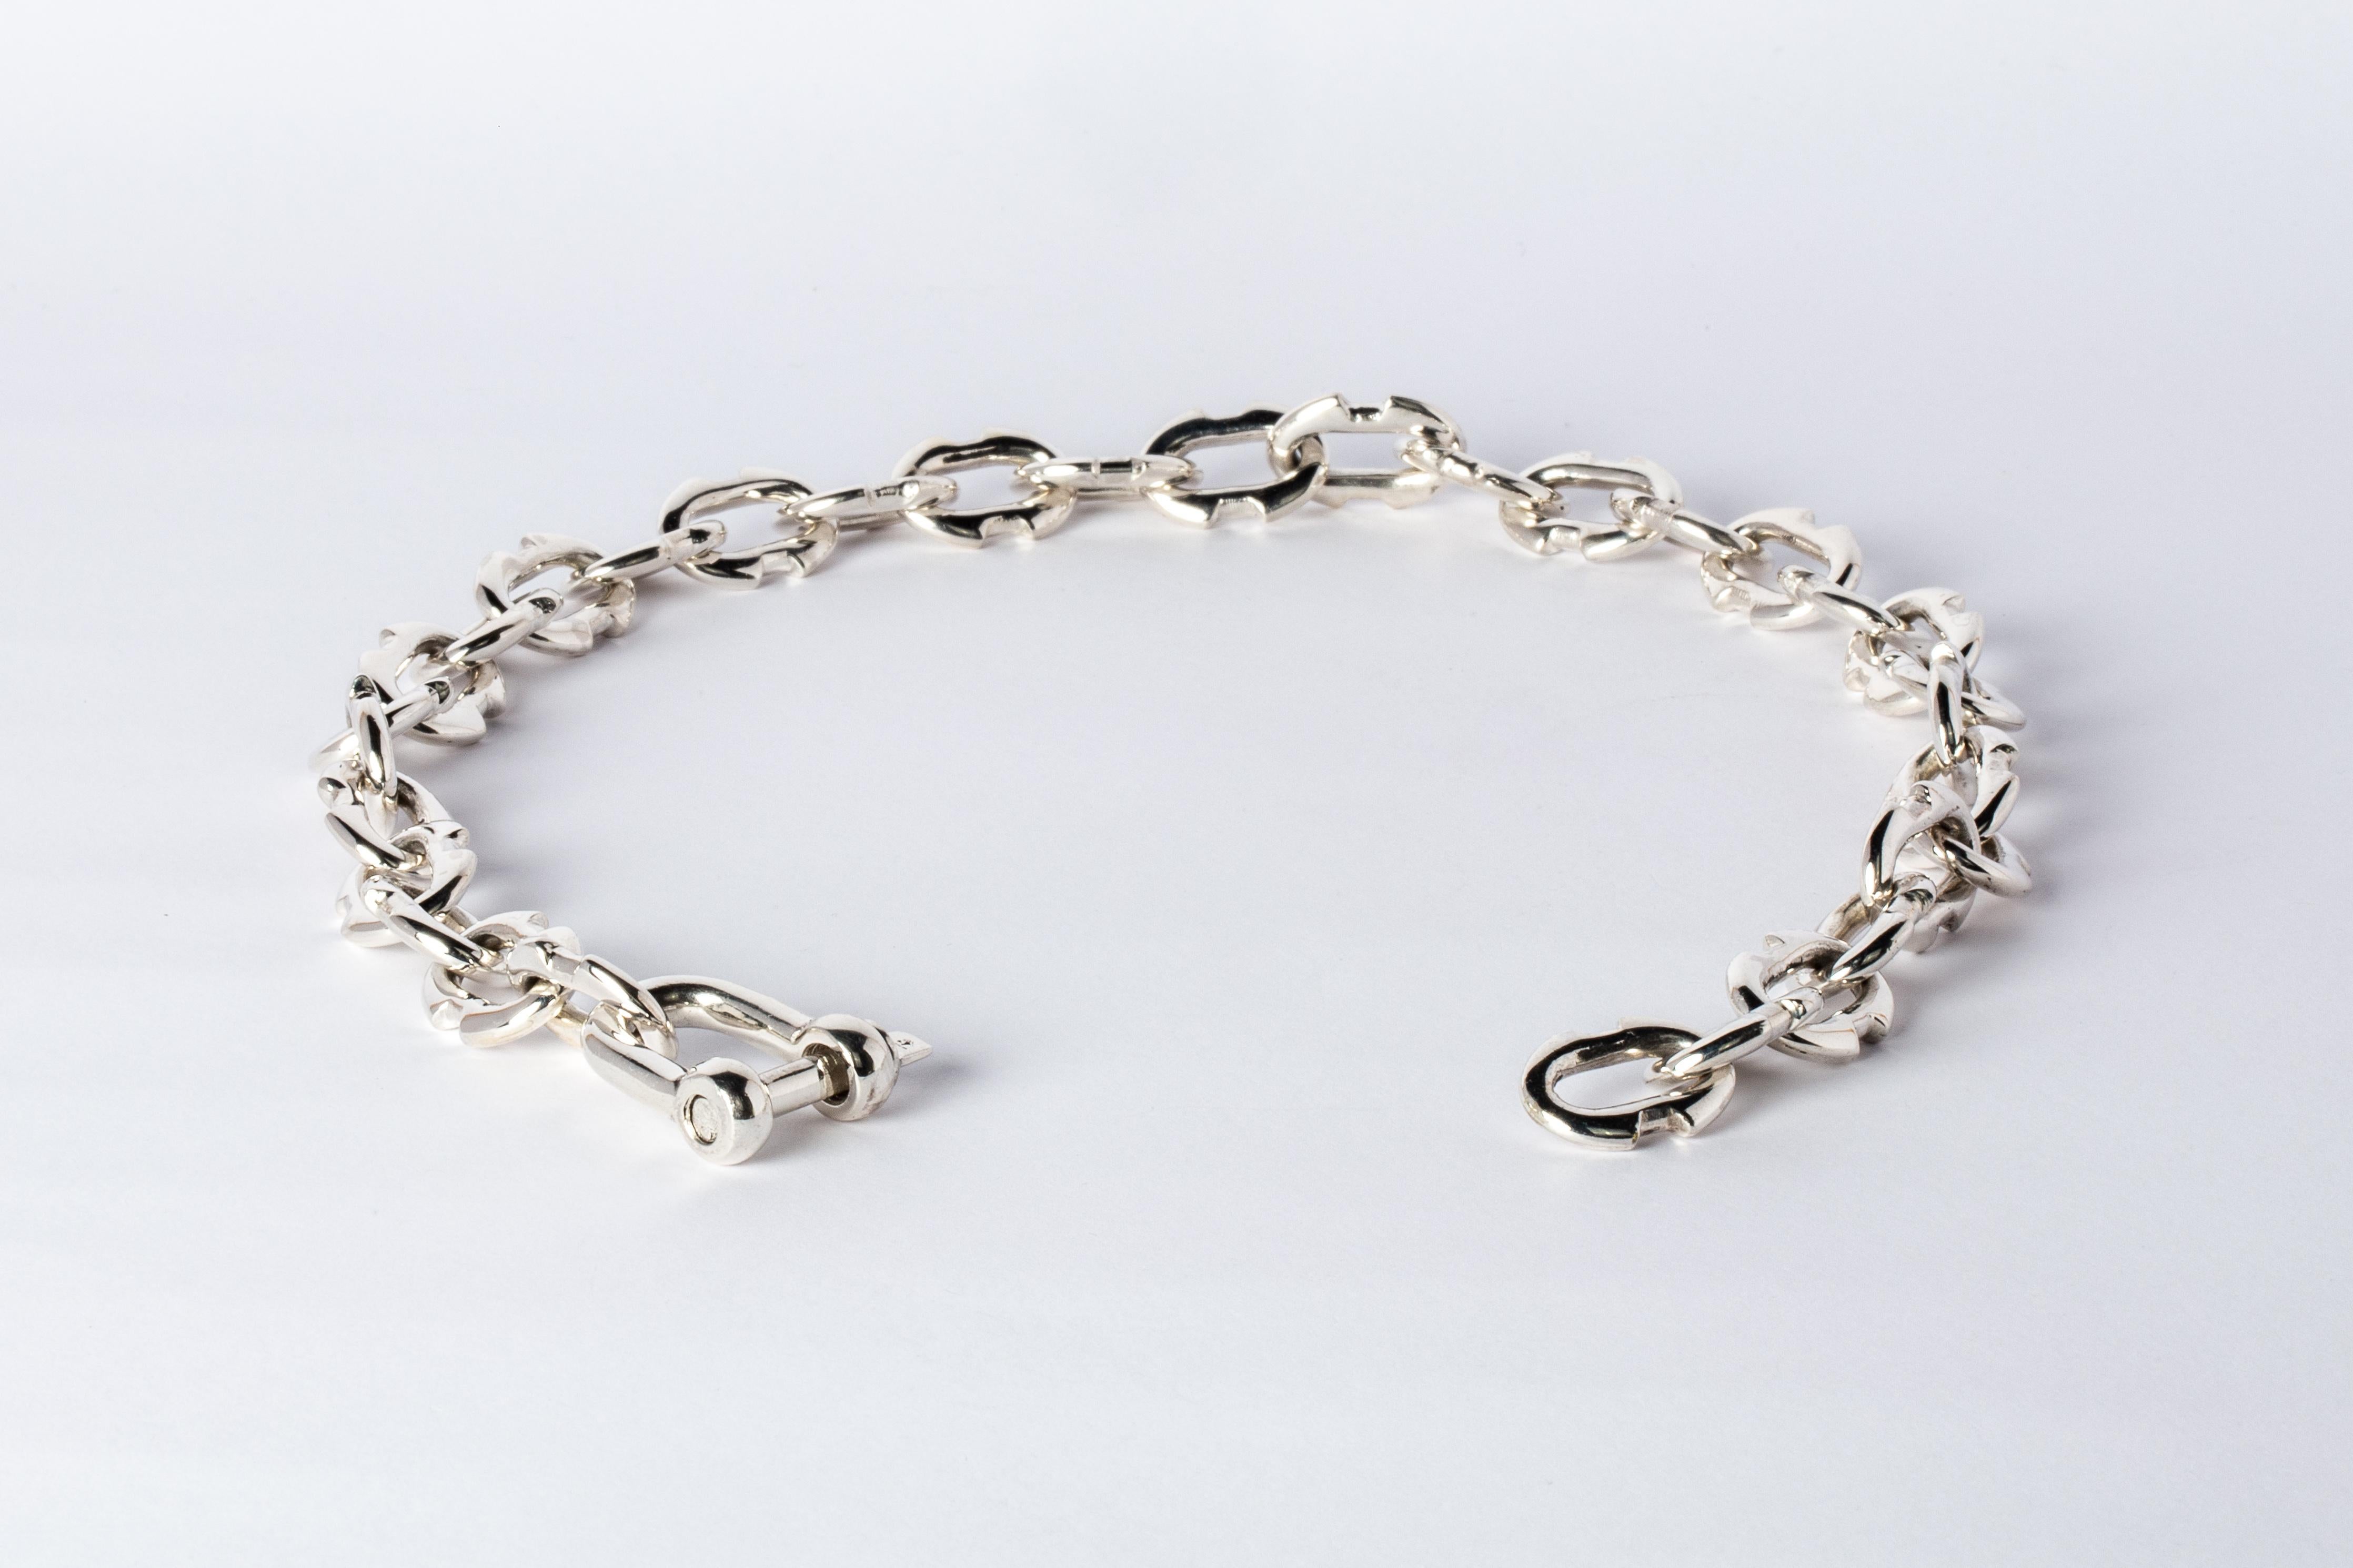 Charm chain necklace in polished sterling silver.
The Charm System is an interrelated group of products that can be mixed and matched or worn individually.
Chain link size (L × H): 25 mm × 17 mm
Chain length: 450 mm
U-bolt (H × W): 35 mm × 23 mm